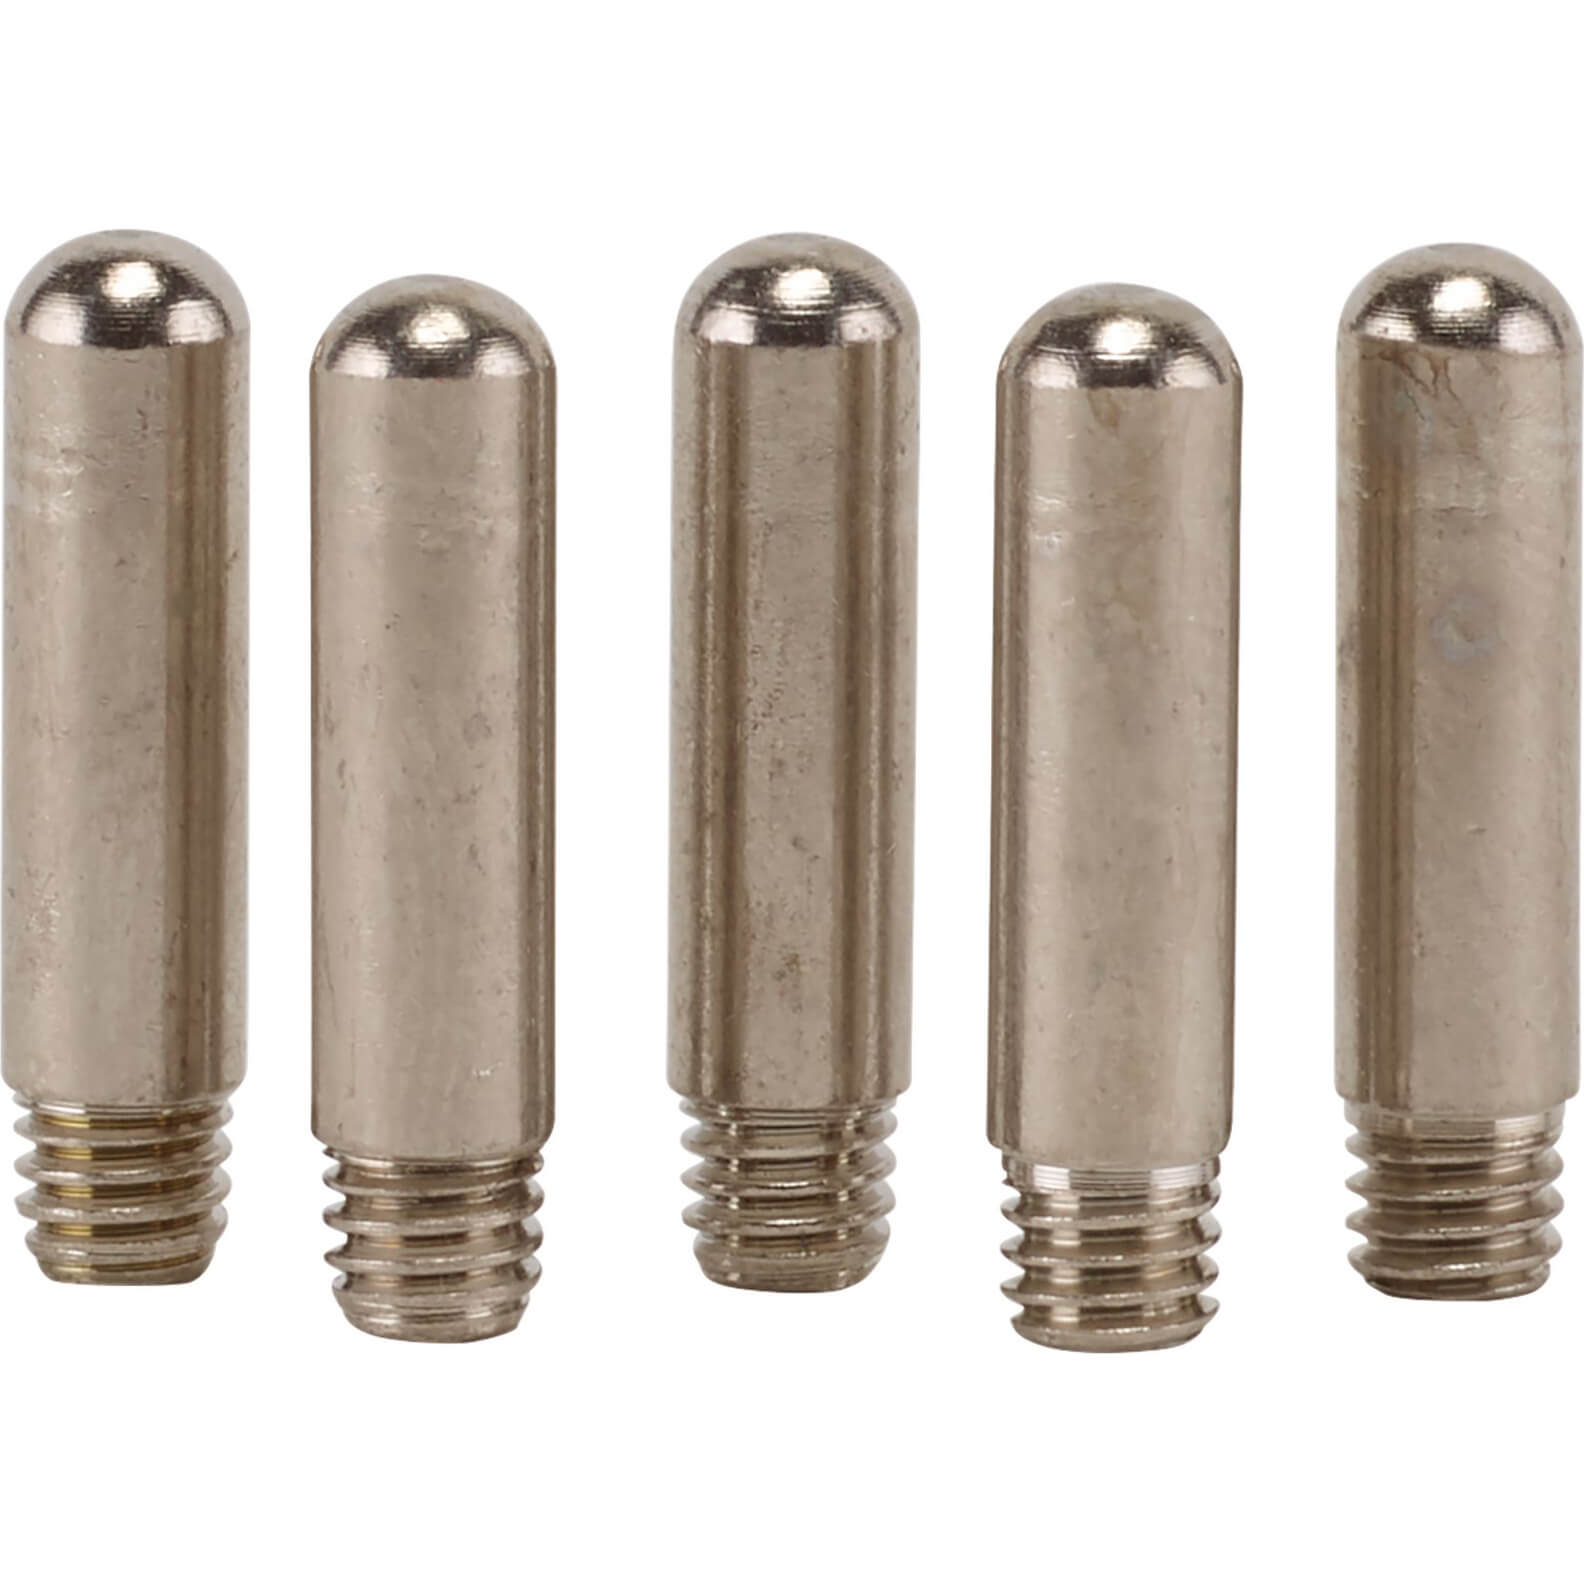 Image of Draper Electrode for 03357 Plasma Cutting Torch Pack of 5